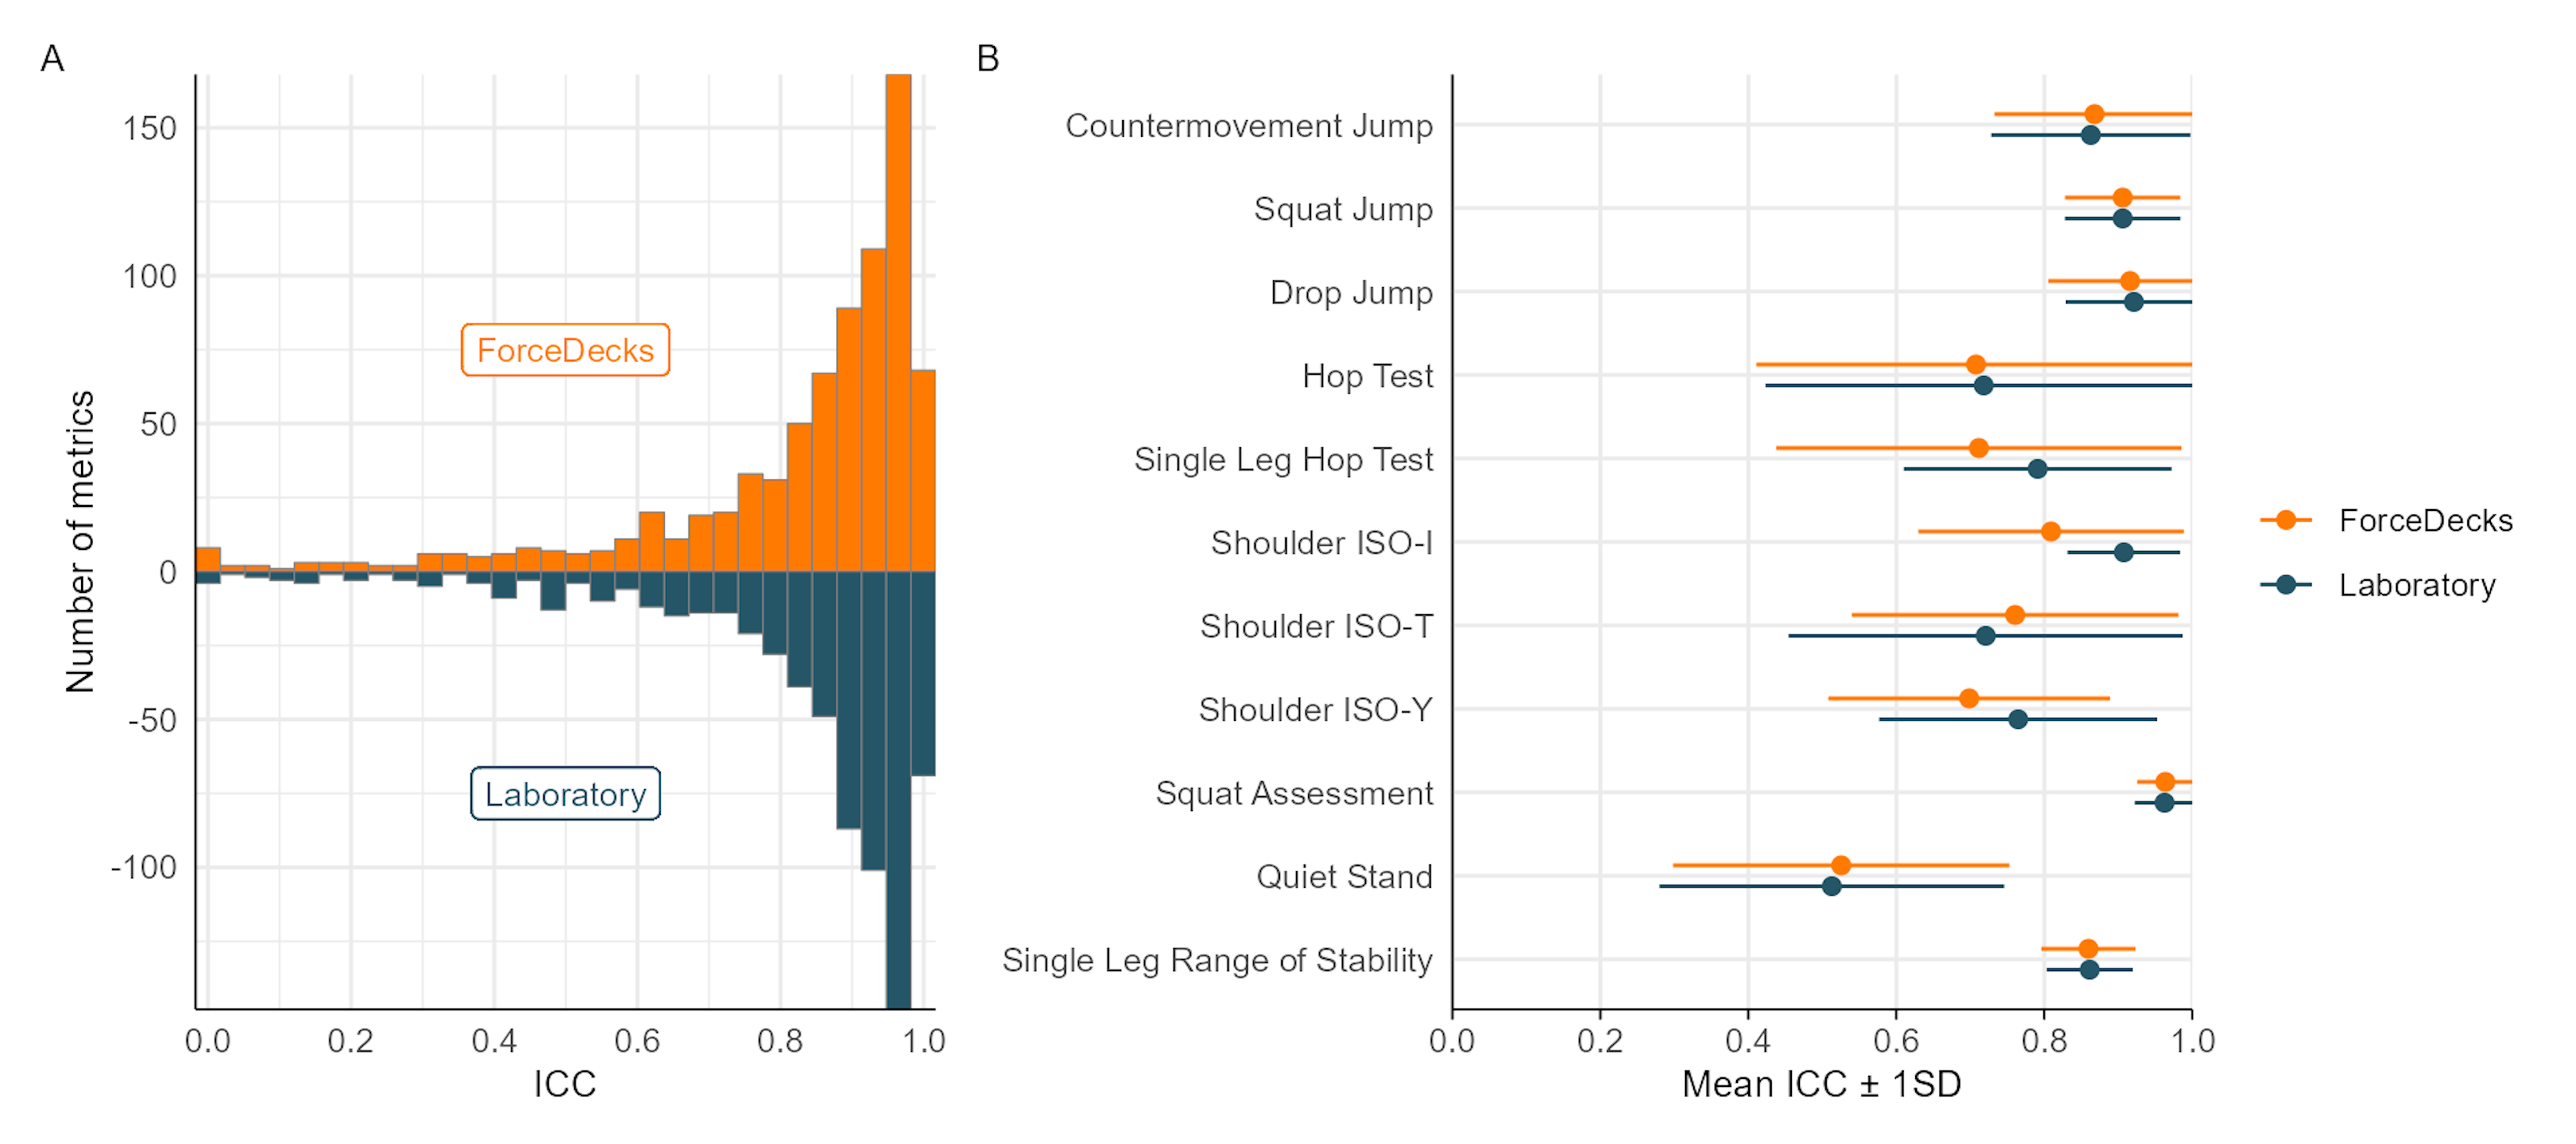 Comparison of the test-retest reliability between ForceDecks and laboratory force plates using ICC. A: Distribution of ICC values for all metrics and tests for ForceDecks (top, orange) and laboratory force plates (bottom, navy). B: Mean ICC ± 1 standard deviation (SD) for all metrics of each test.